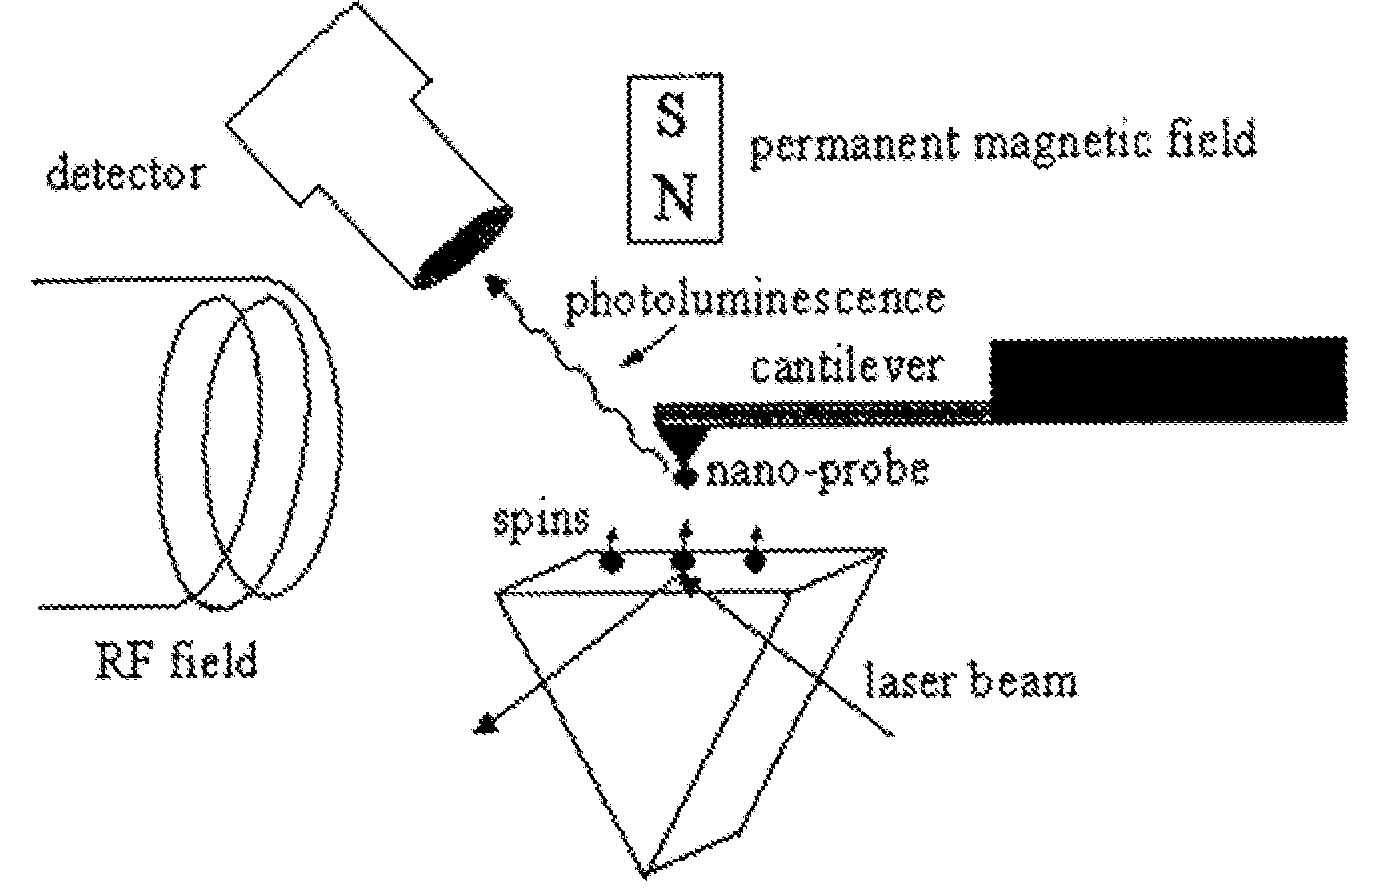 Spin microscope based on optically detected magnetic resonance